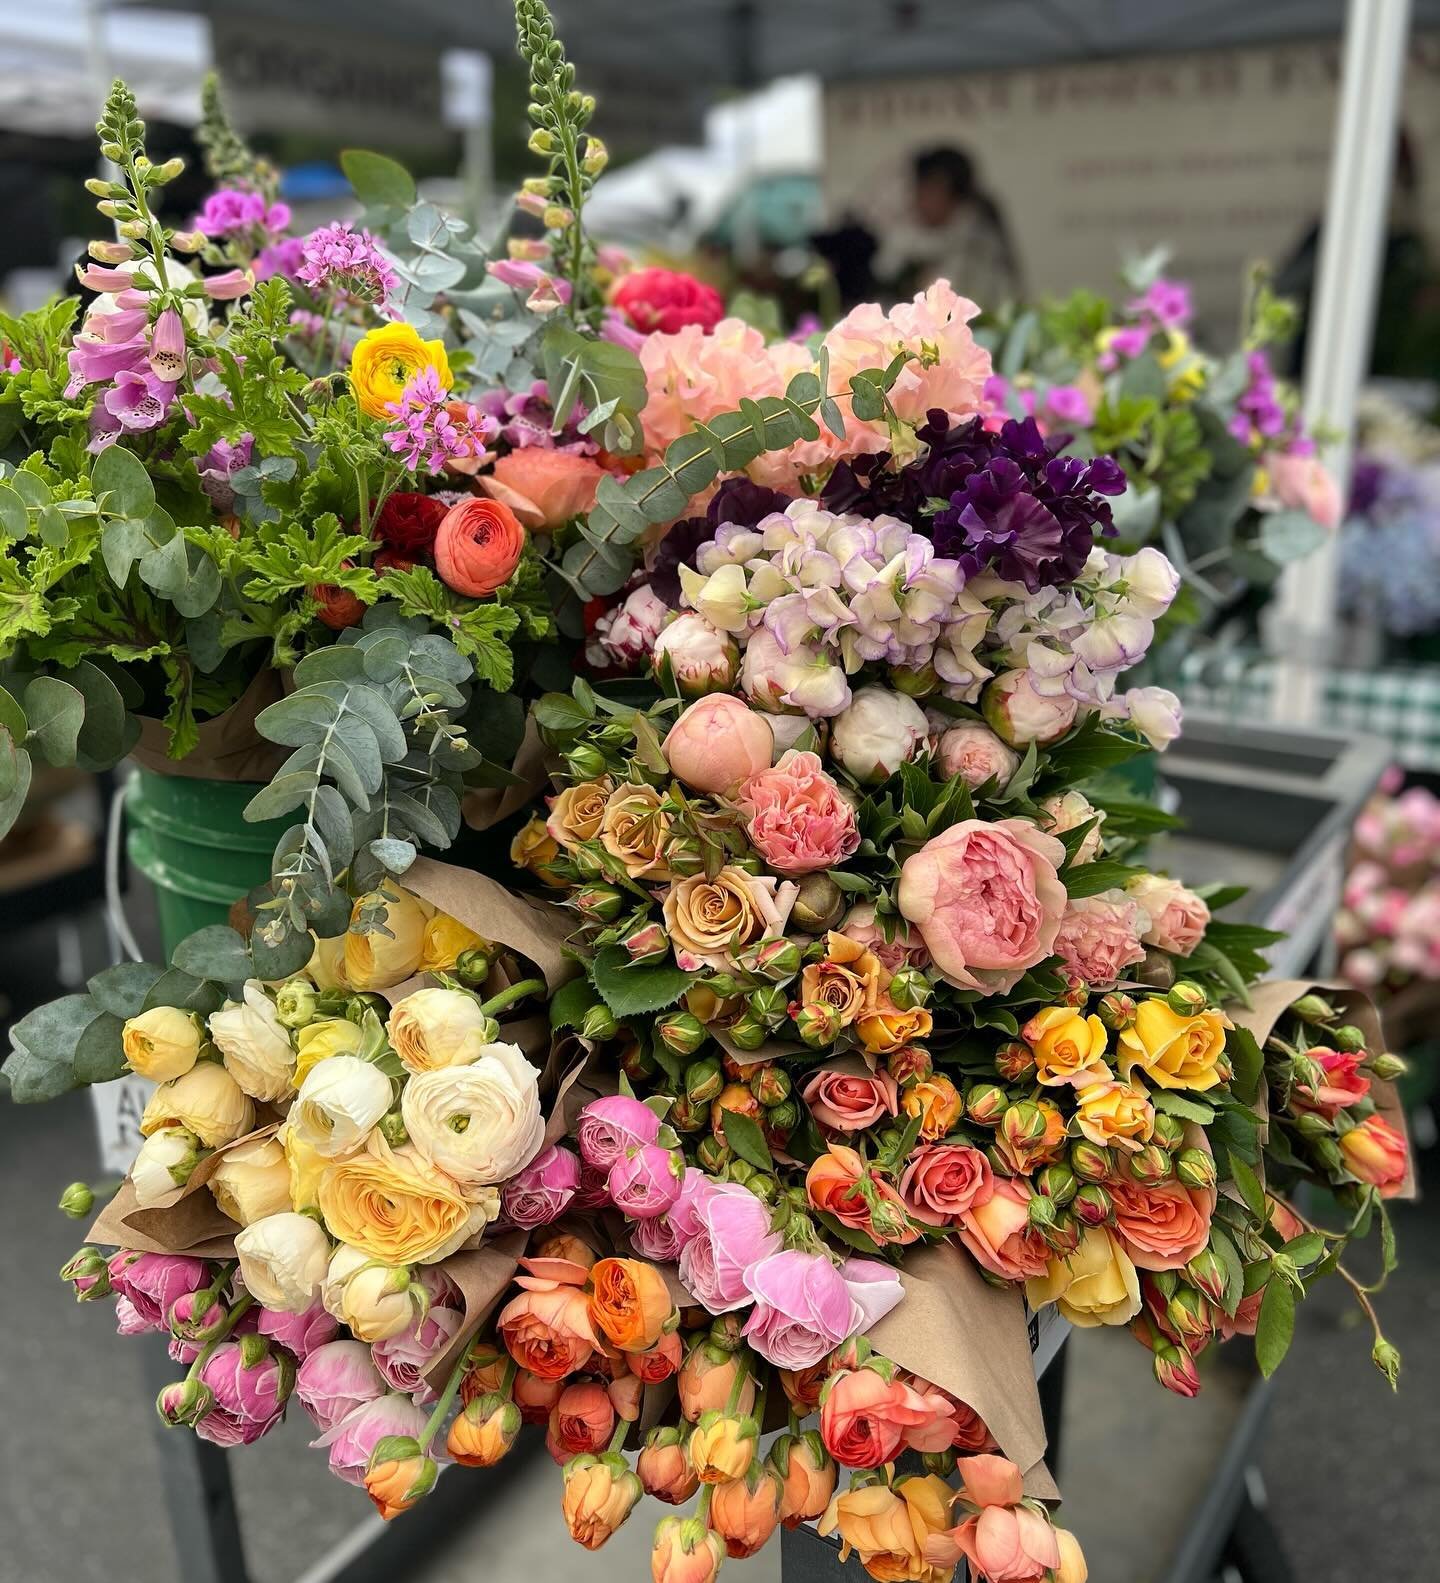 If you know me, you know I love to shop. When it comes to shopping for in season, local &amp; organic flowers, it&rsquo;s one of my favorite ways to spend my time. My team may feel differently. Somebody&rsquo;s got to condition and process all this b